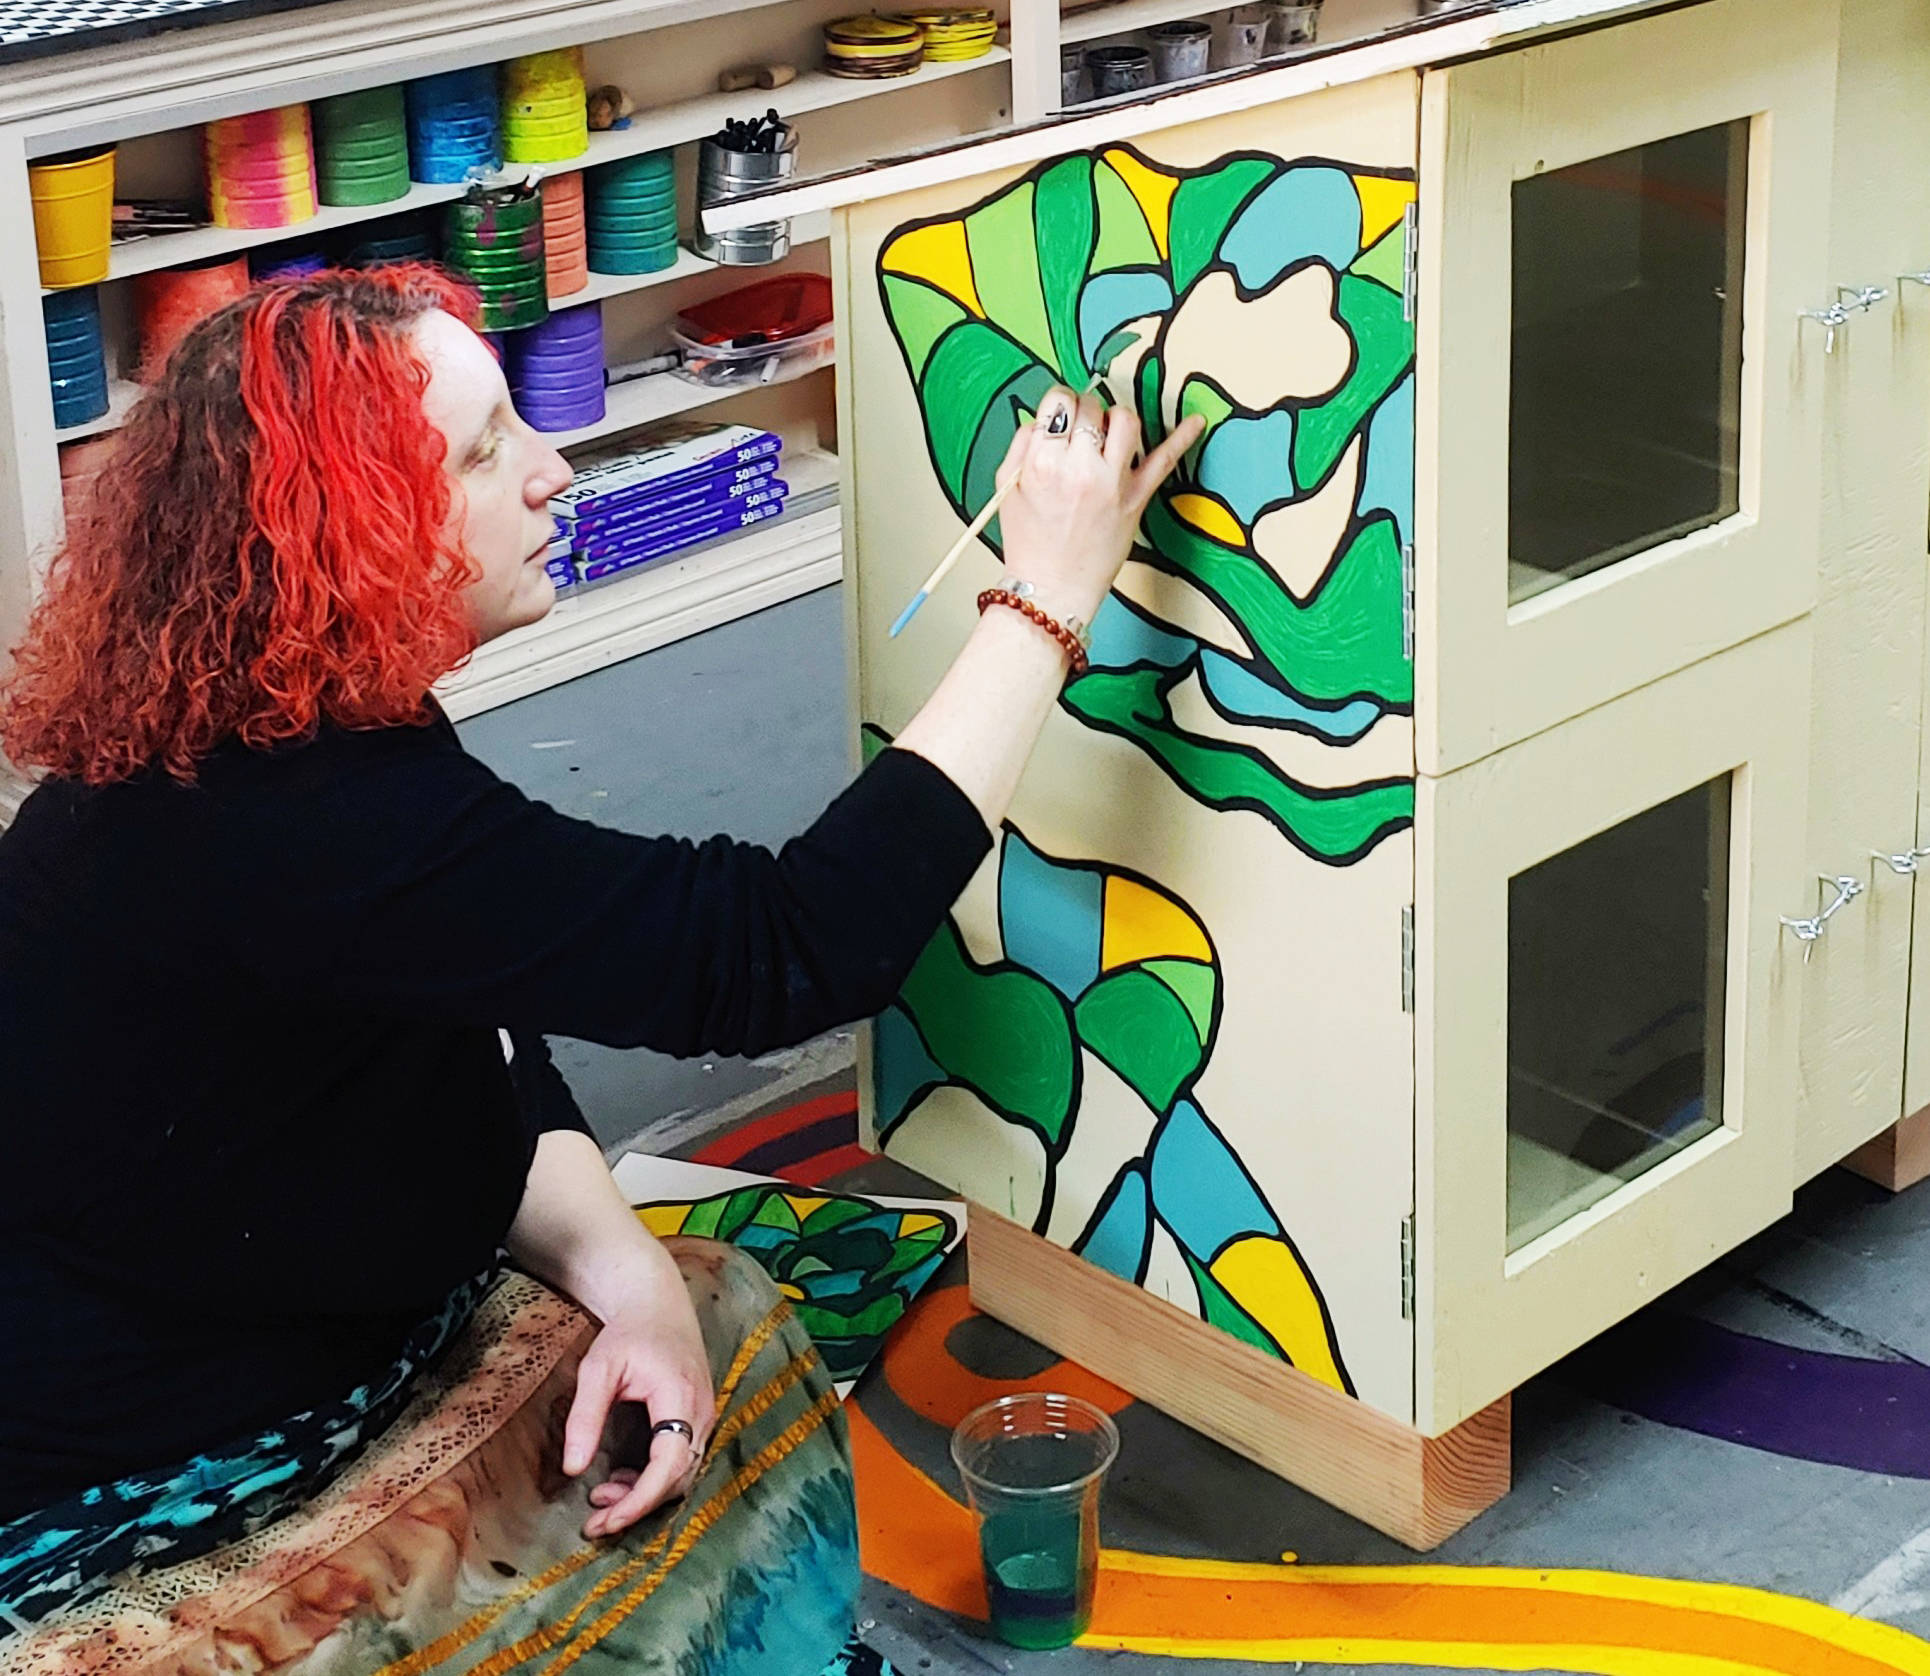 A pantry getting final decoration/touches at Artsy Fartsy, an art school/studio in downtown Kent. COURTESY PHOTO, Kent Community Partners